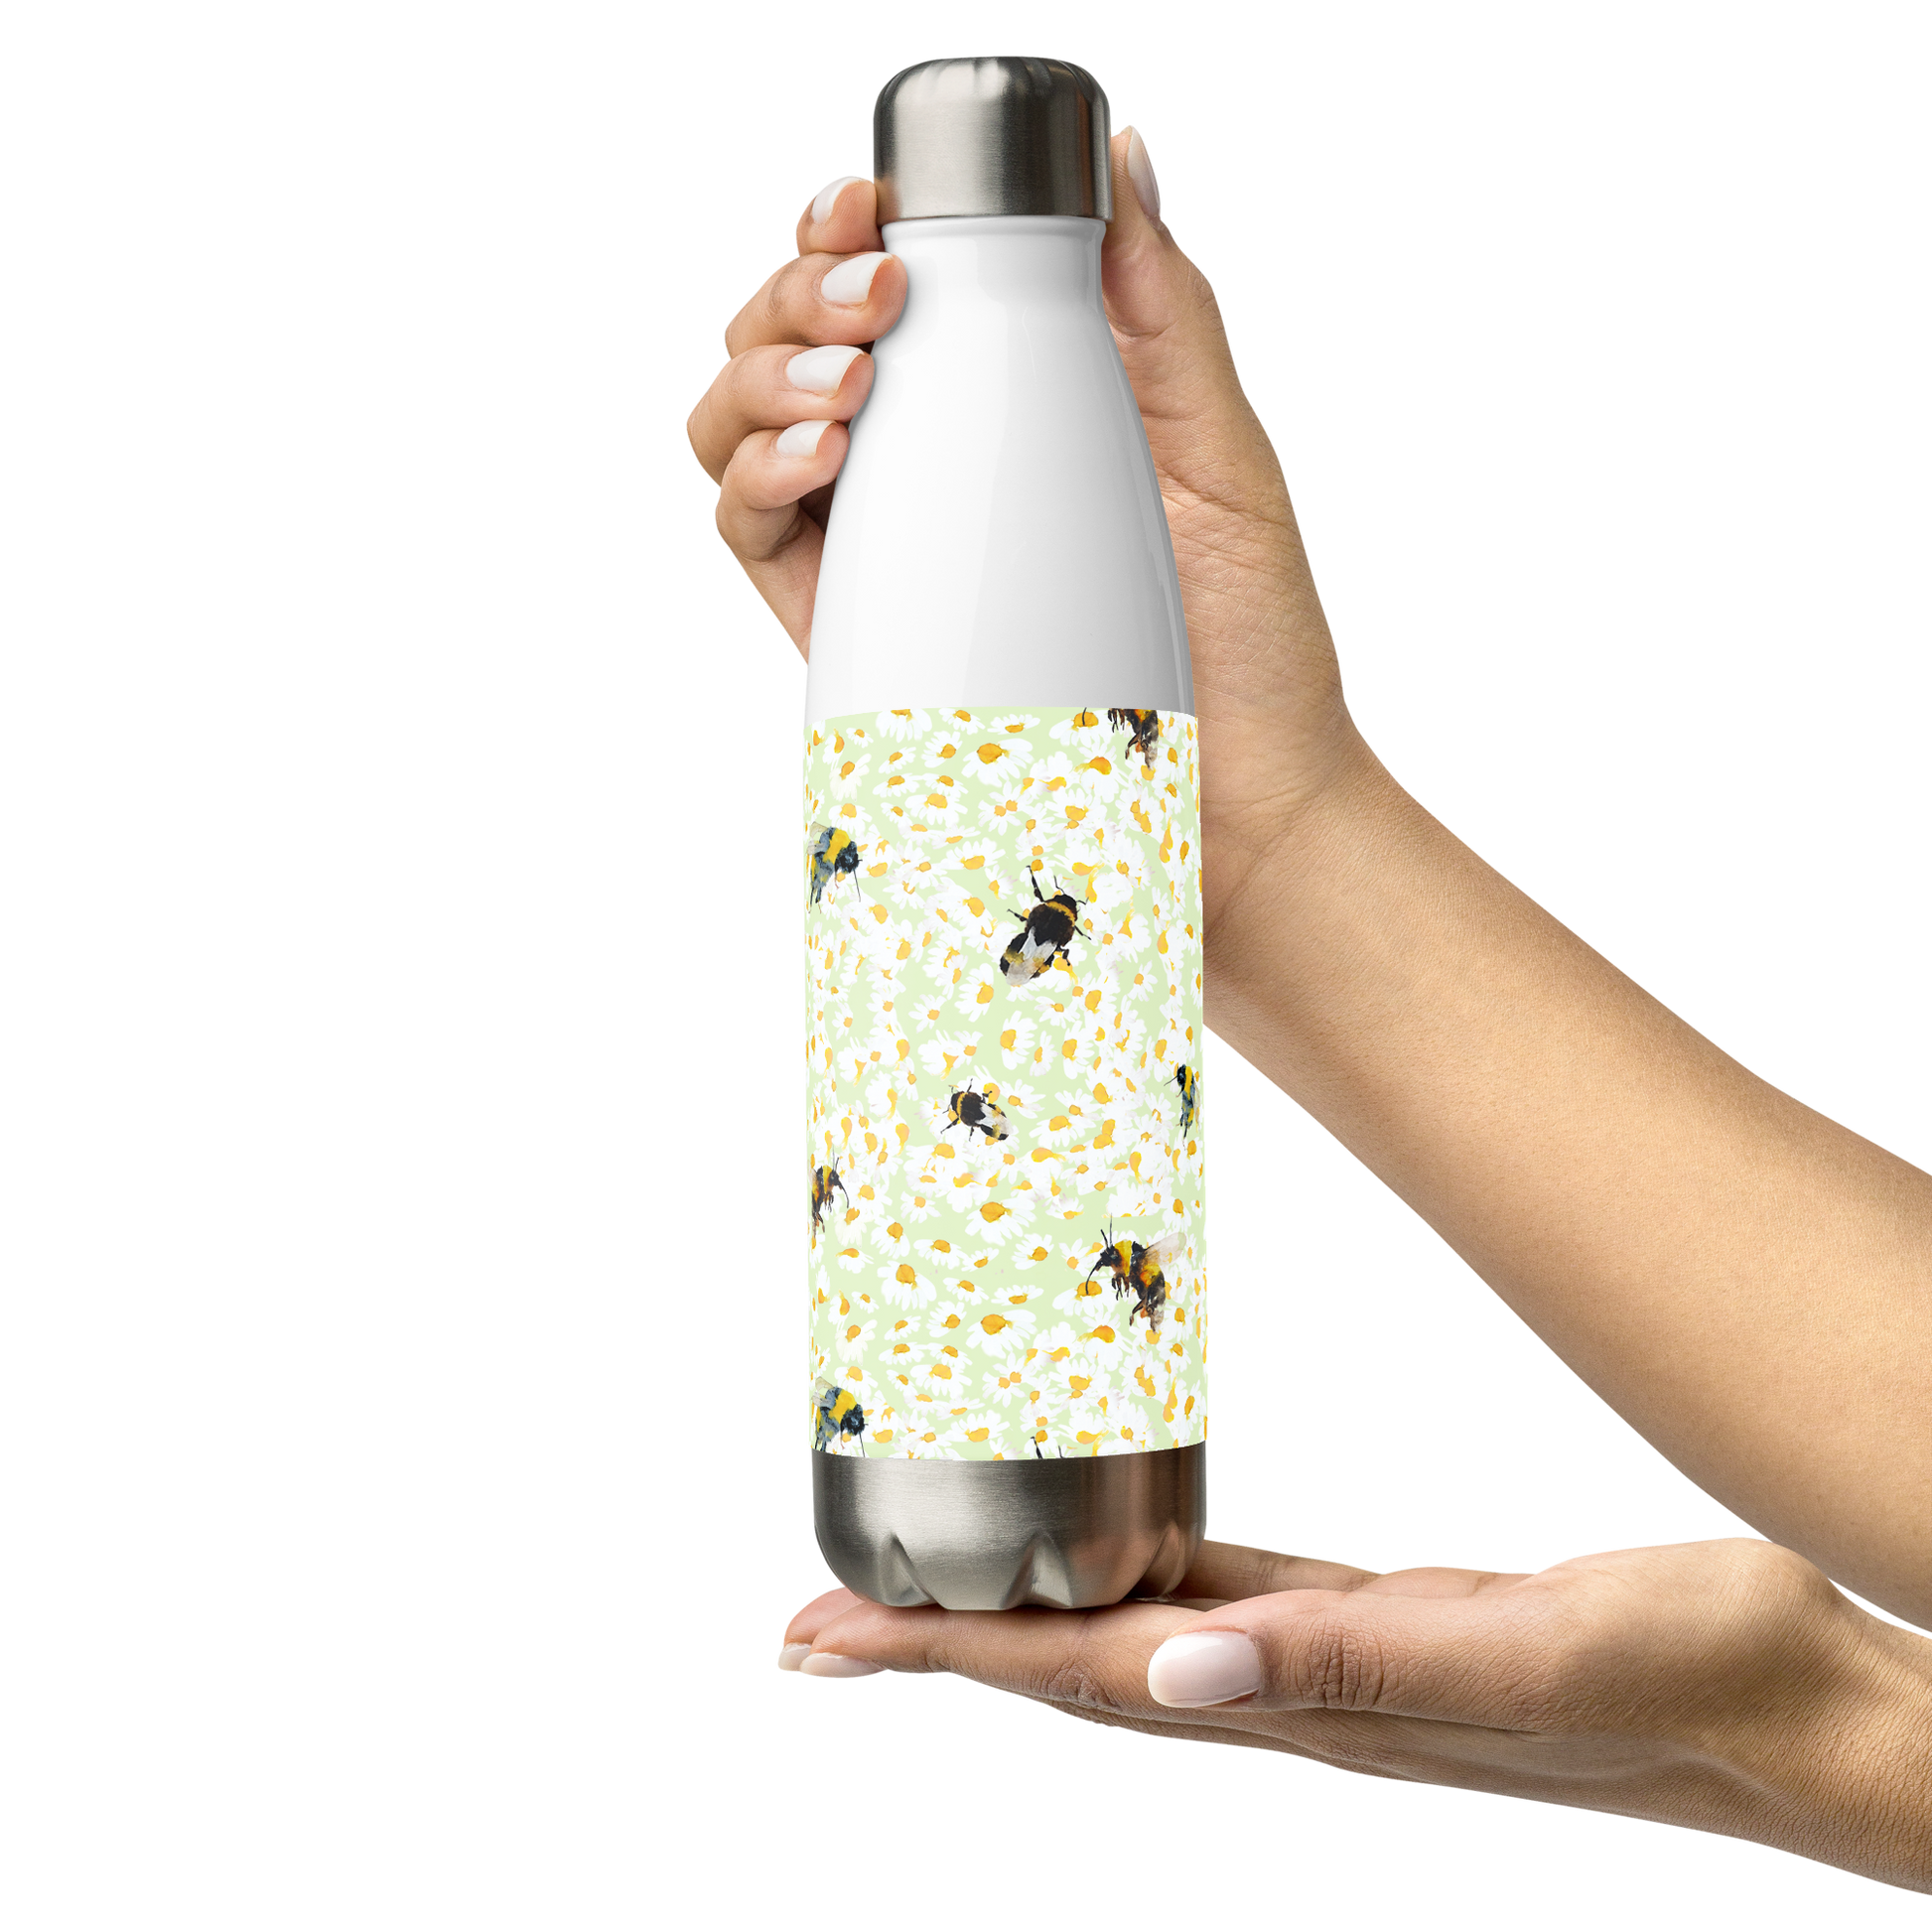 Bee's and Daisy Pattern on drinking bottle by Artist Annie Grant